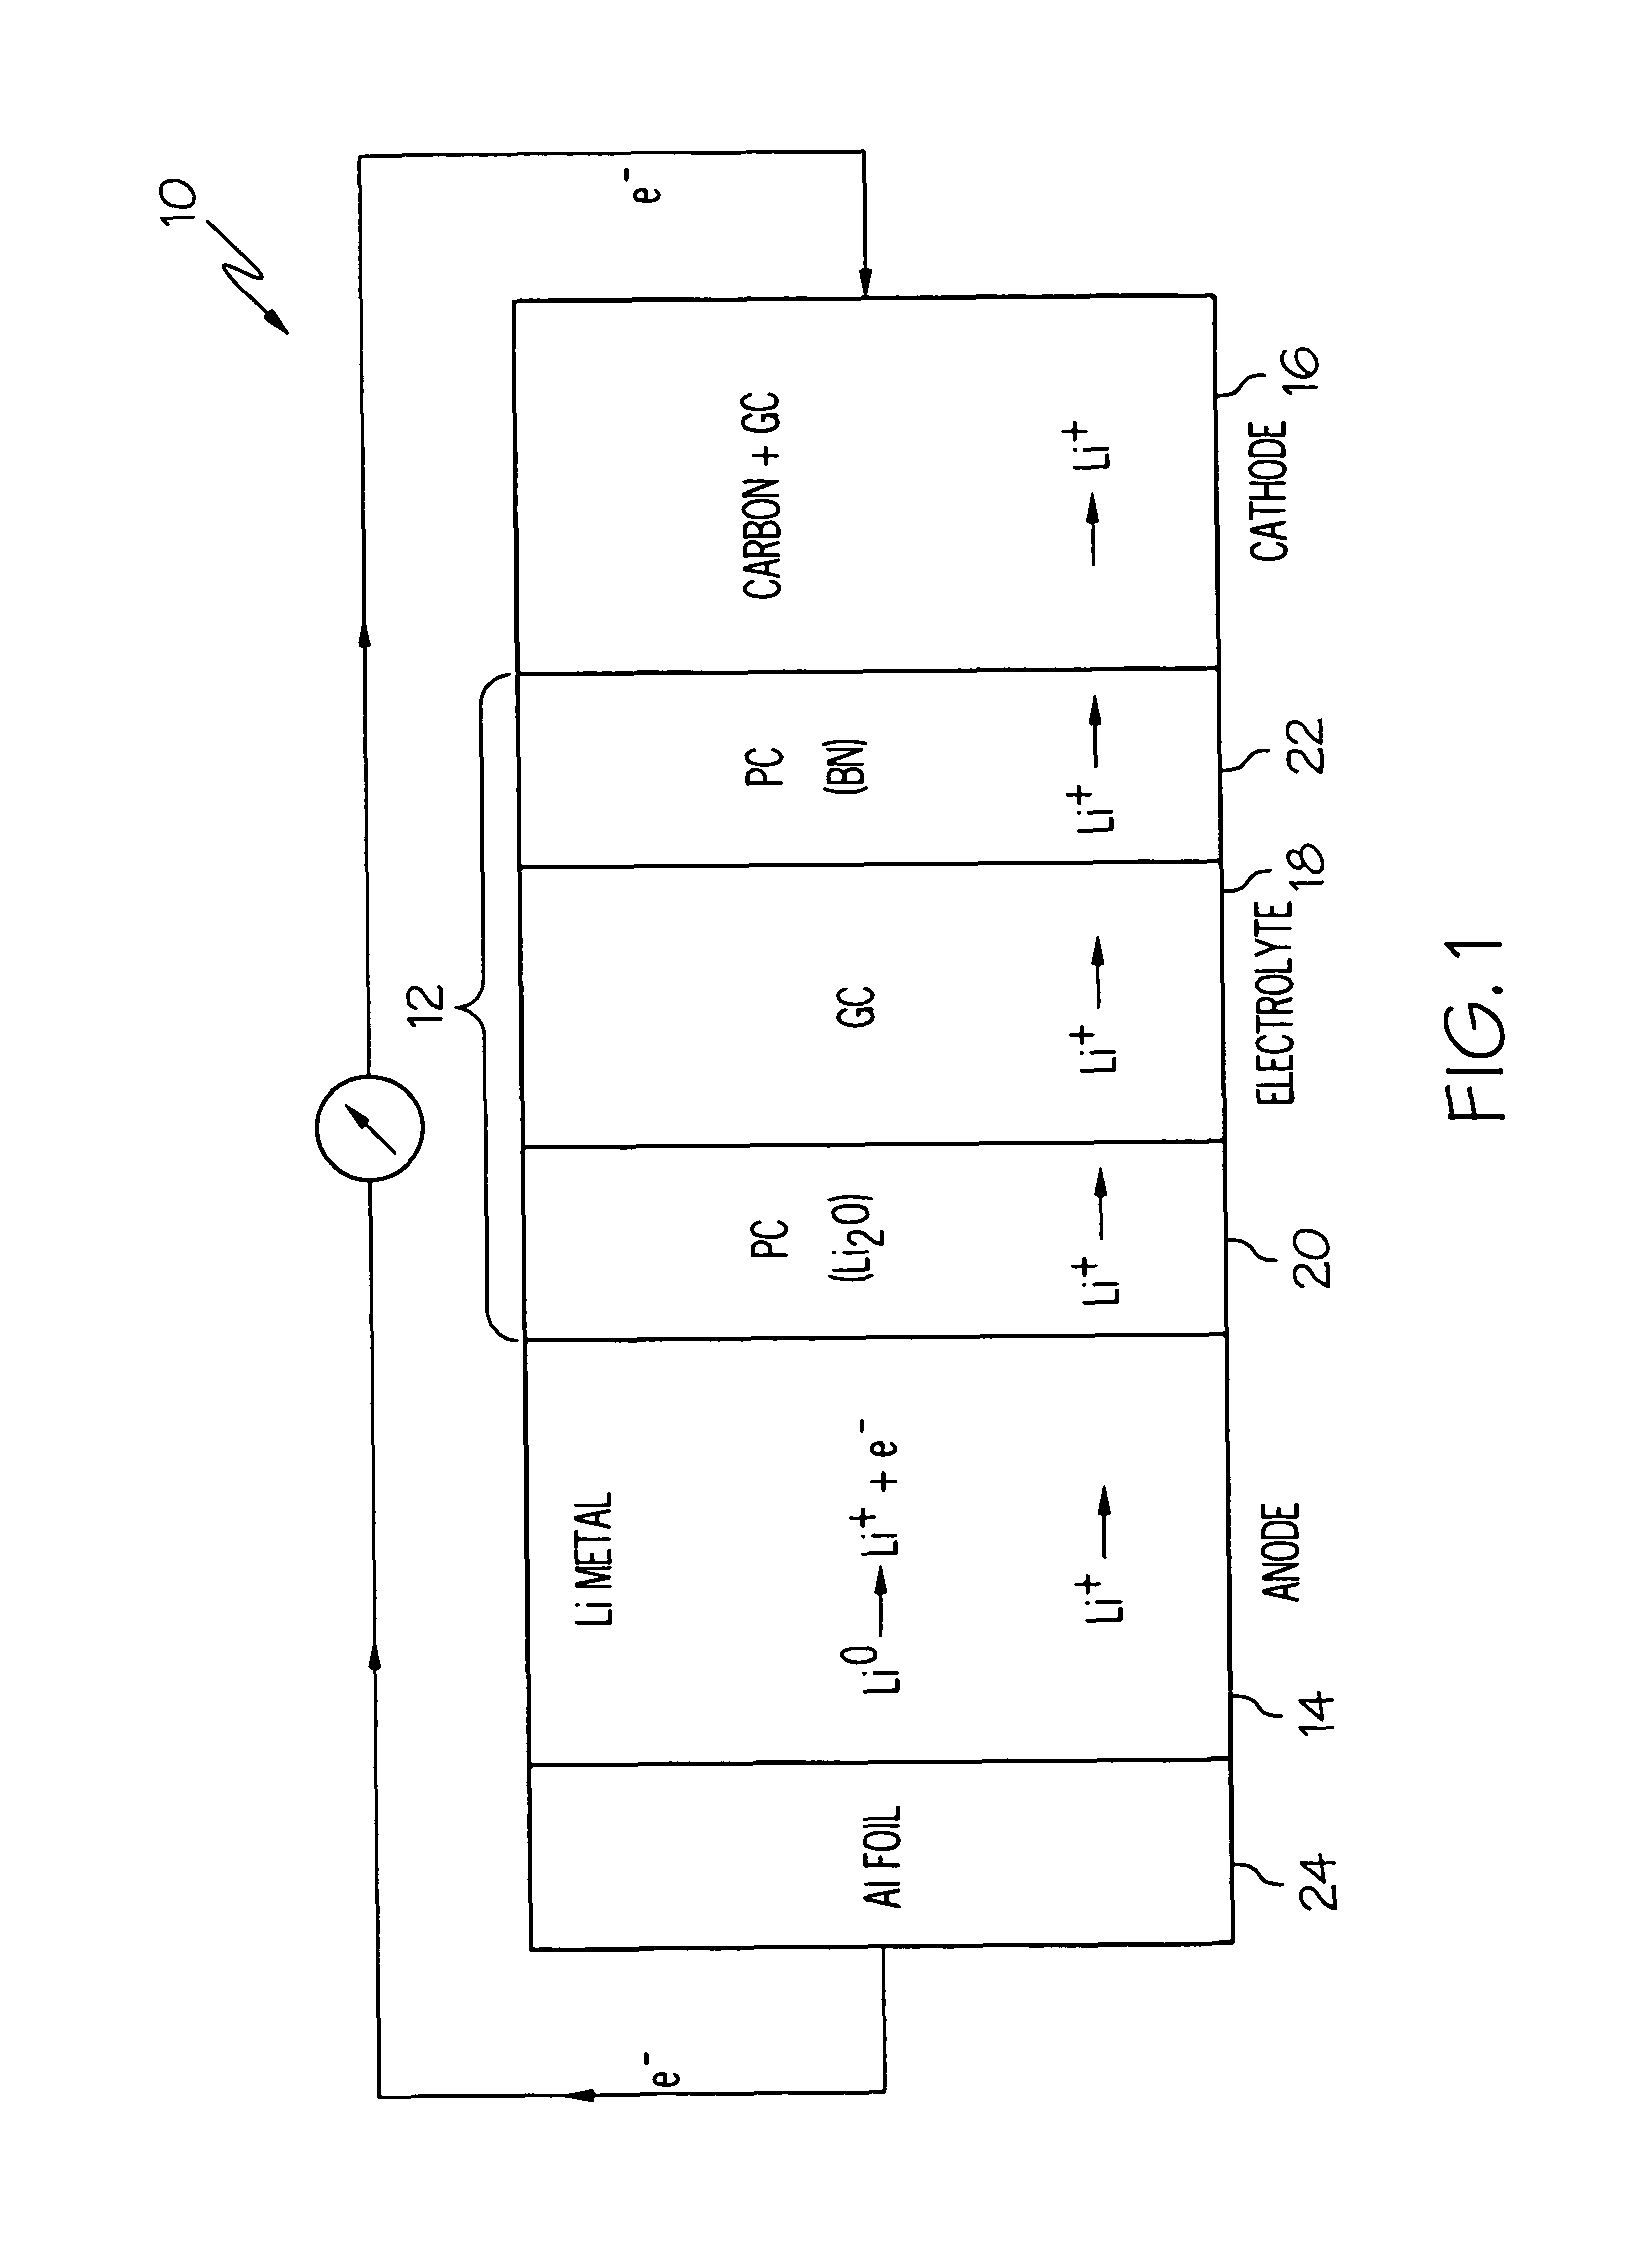 Lithium-air cells incorporating solid electrolytes having enhanced ionic transport and catalytic activity